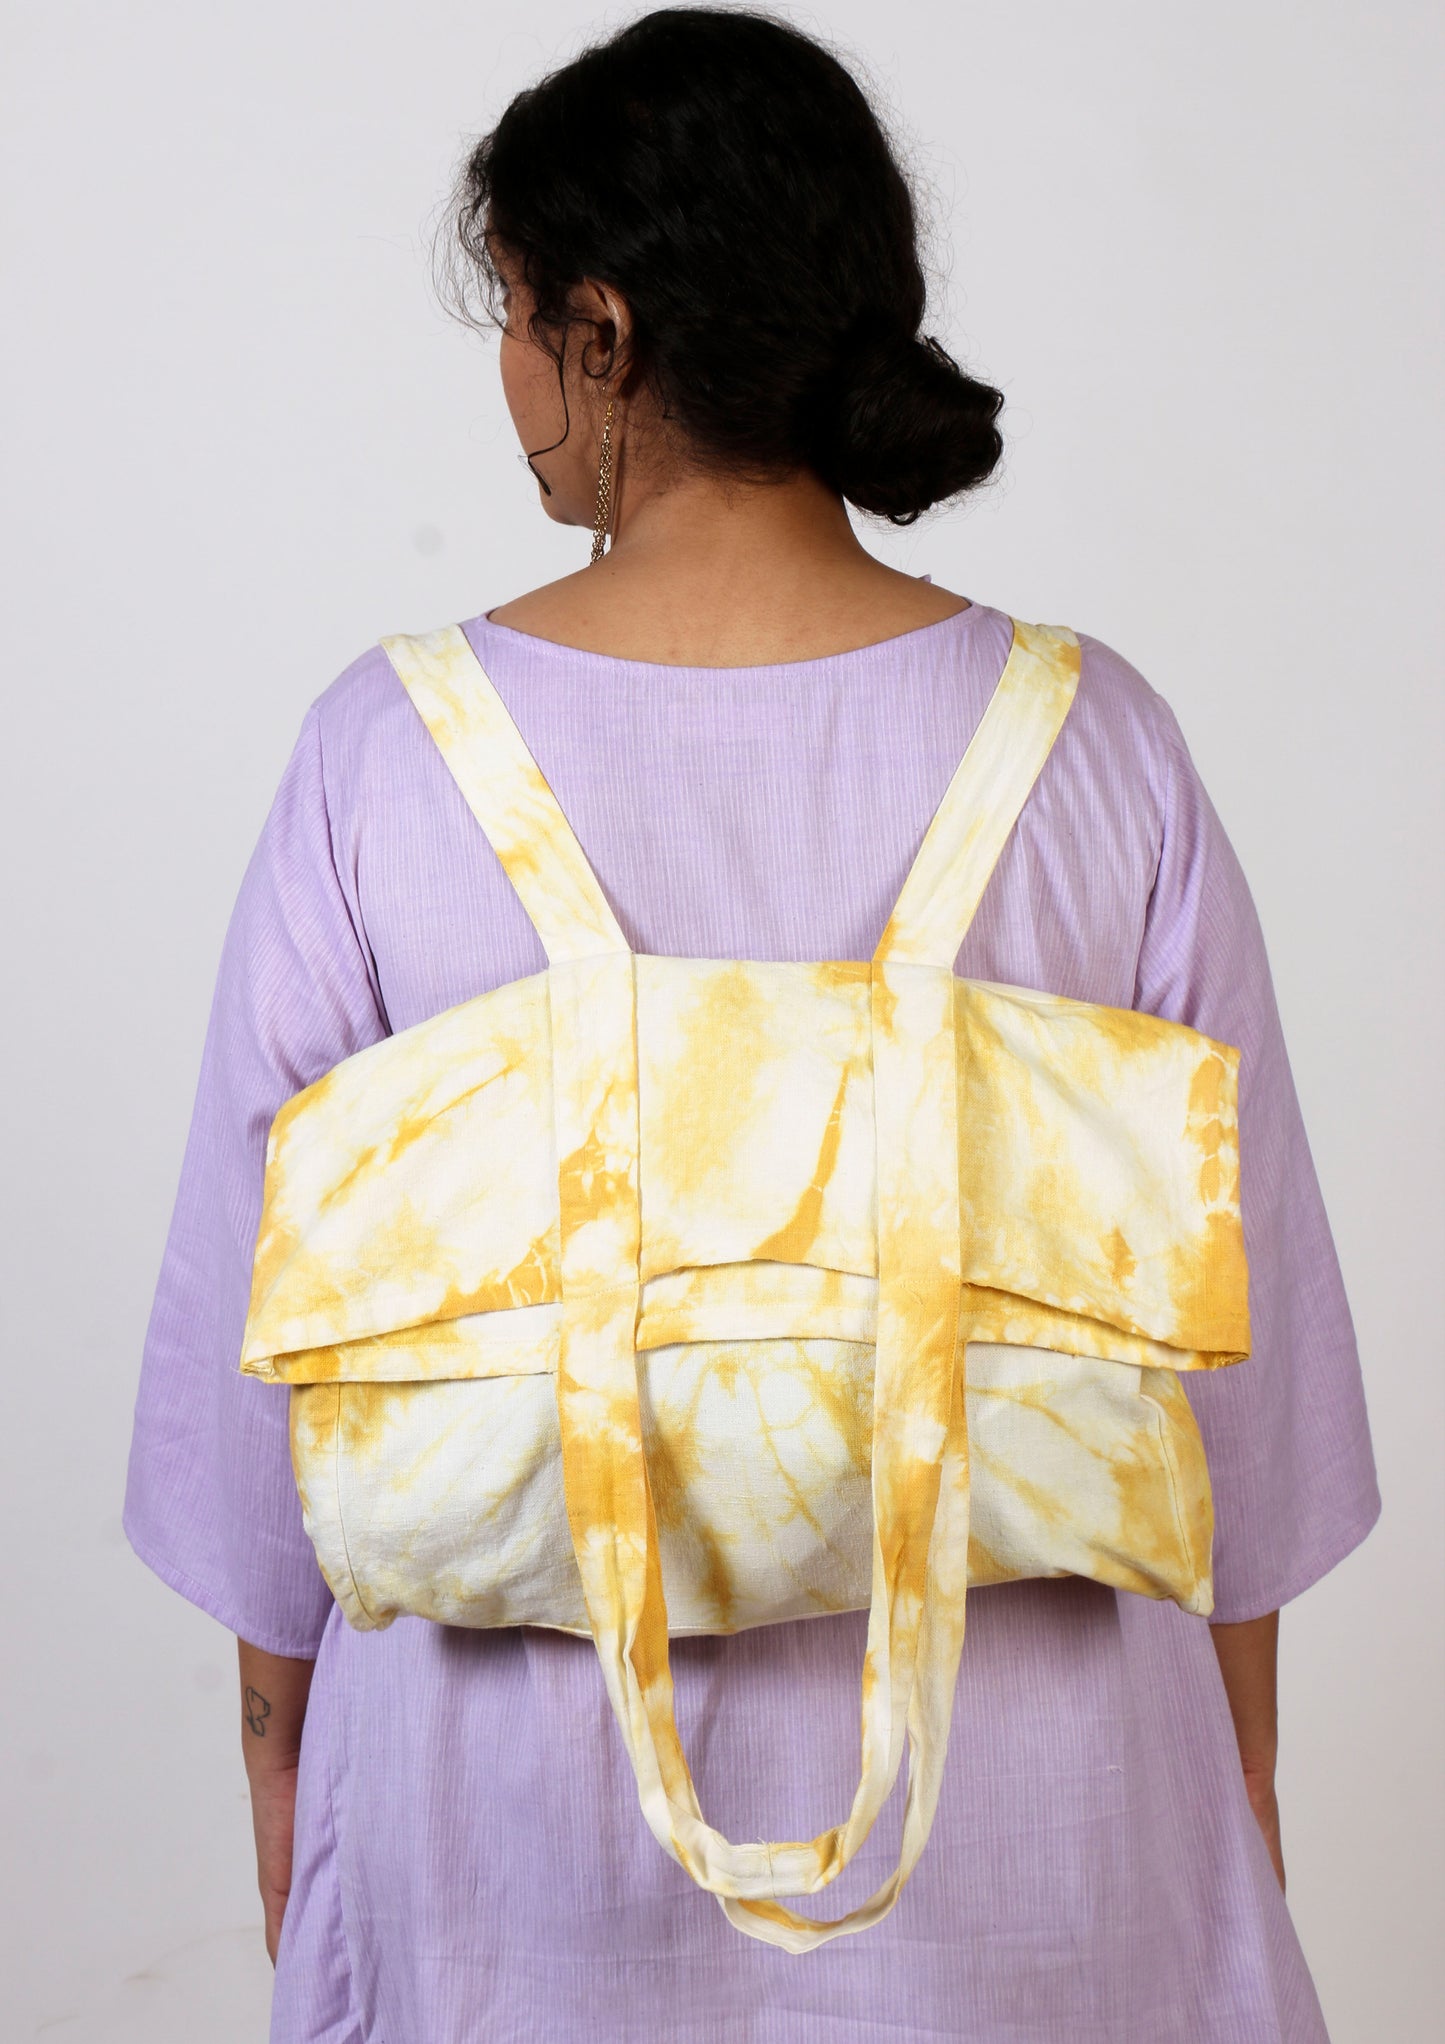 Curry stained totepack